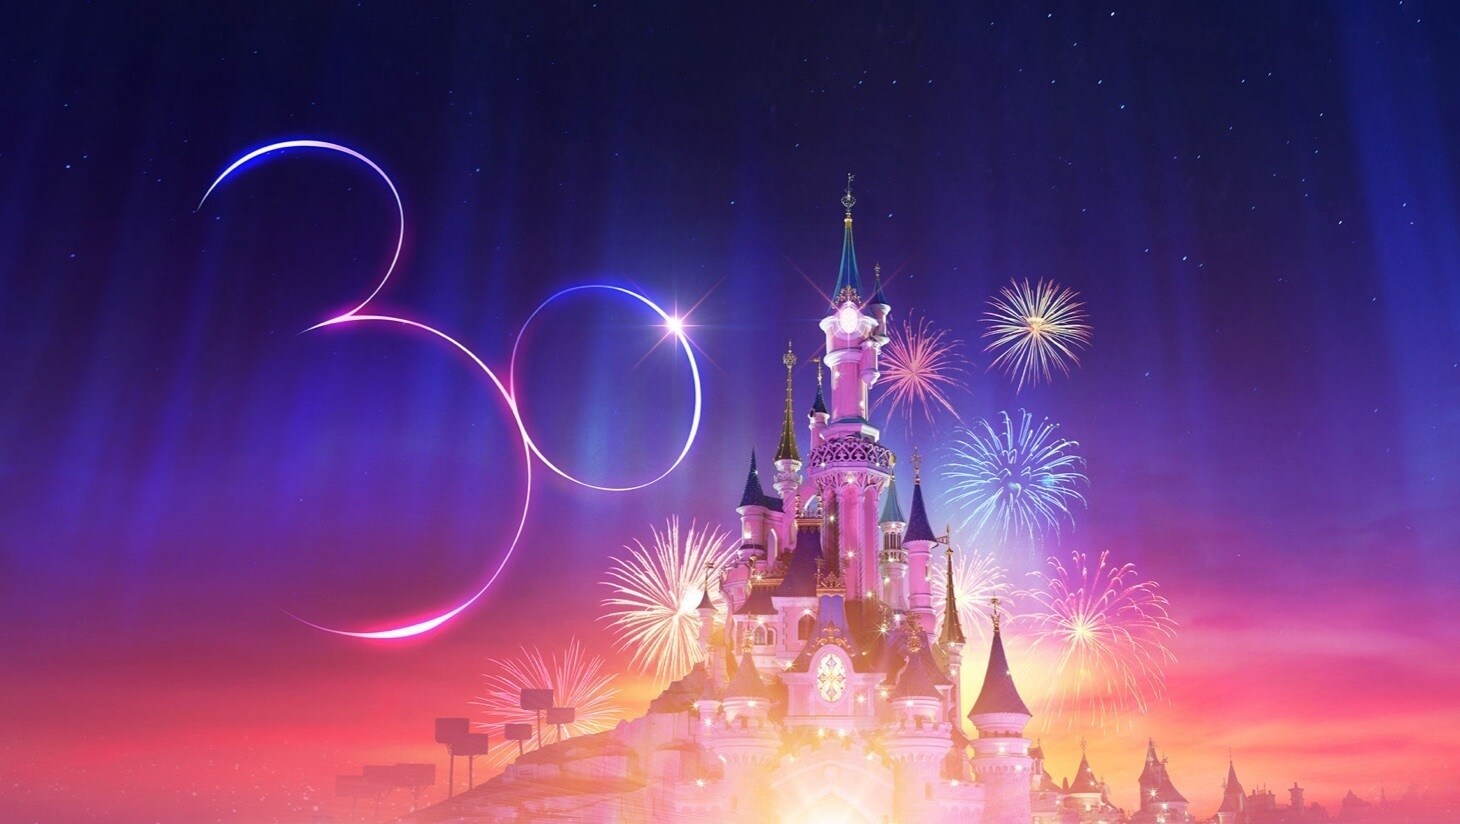 Sleeping Beauty castle at Disneyland Paris with a 30-shaped Mickey head in the sky